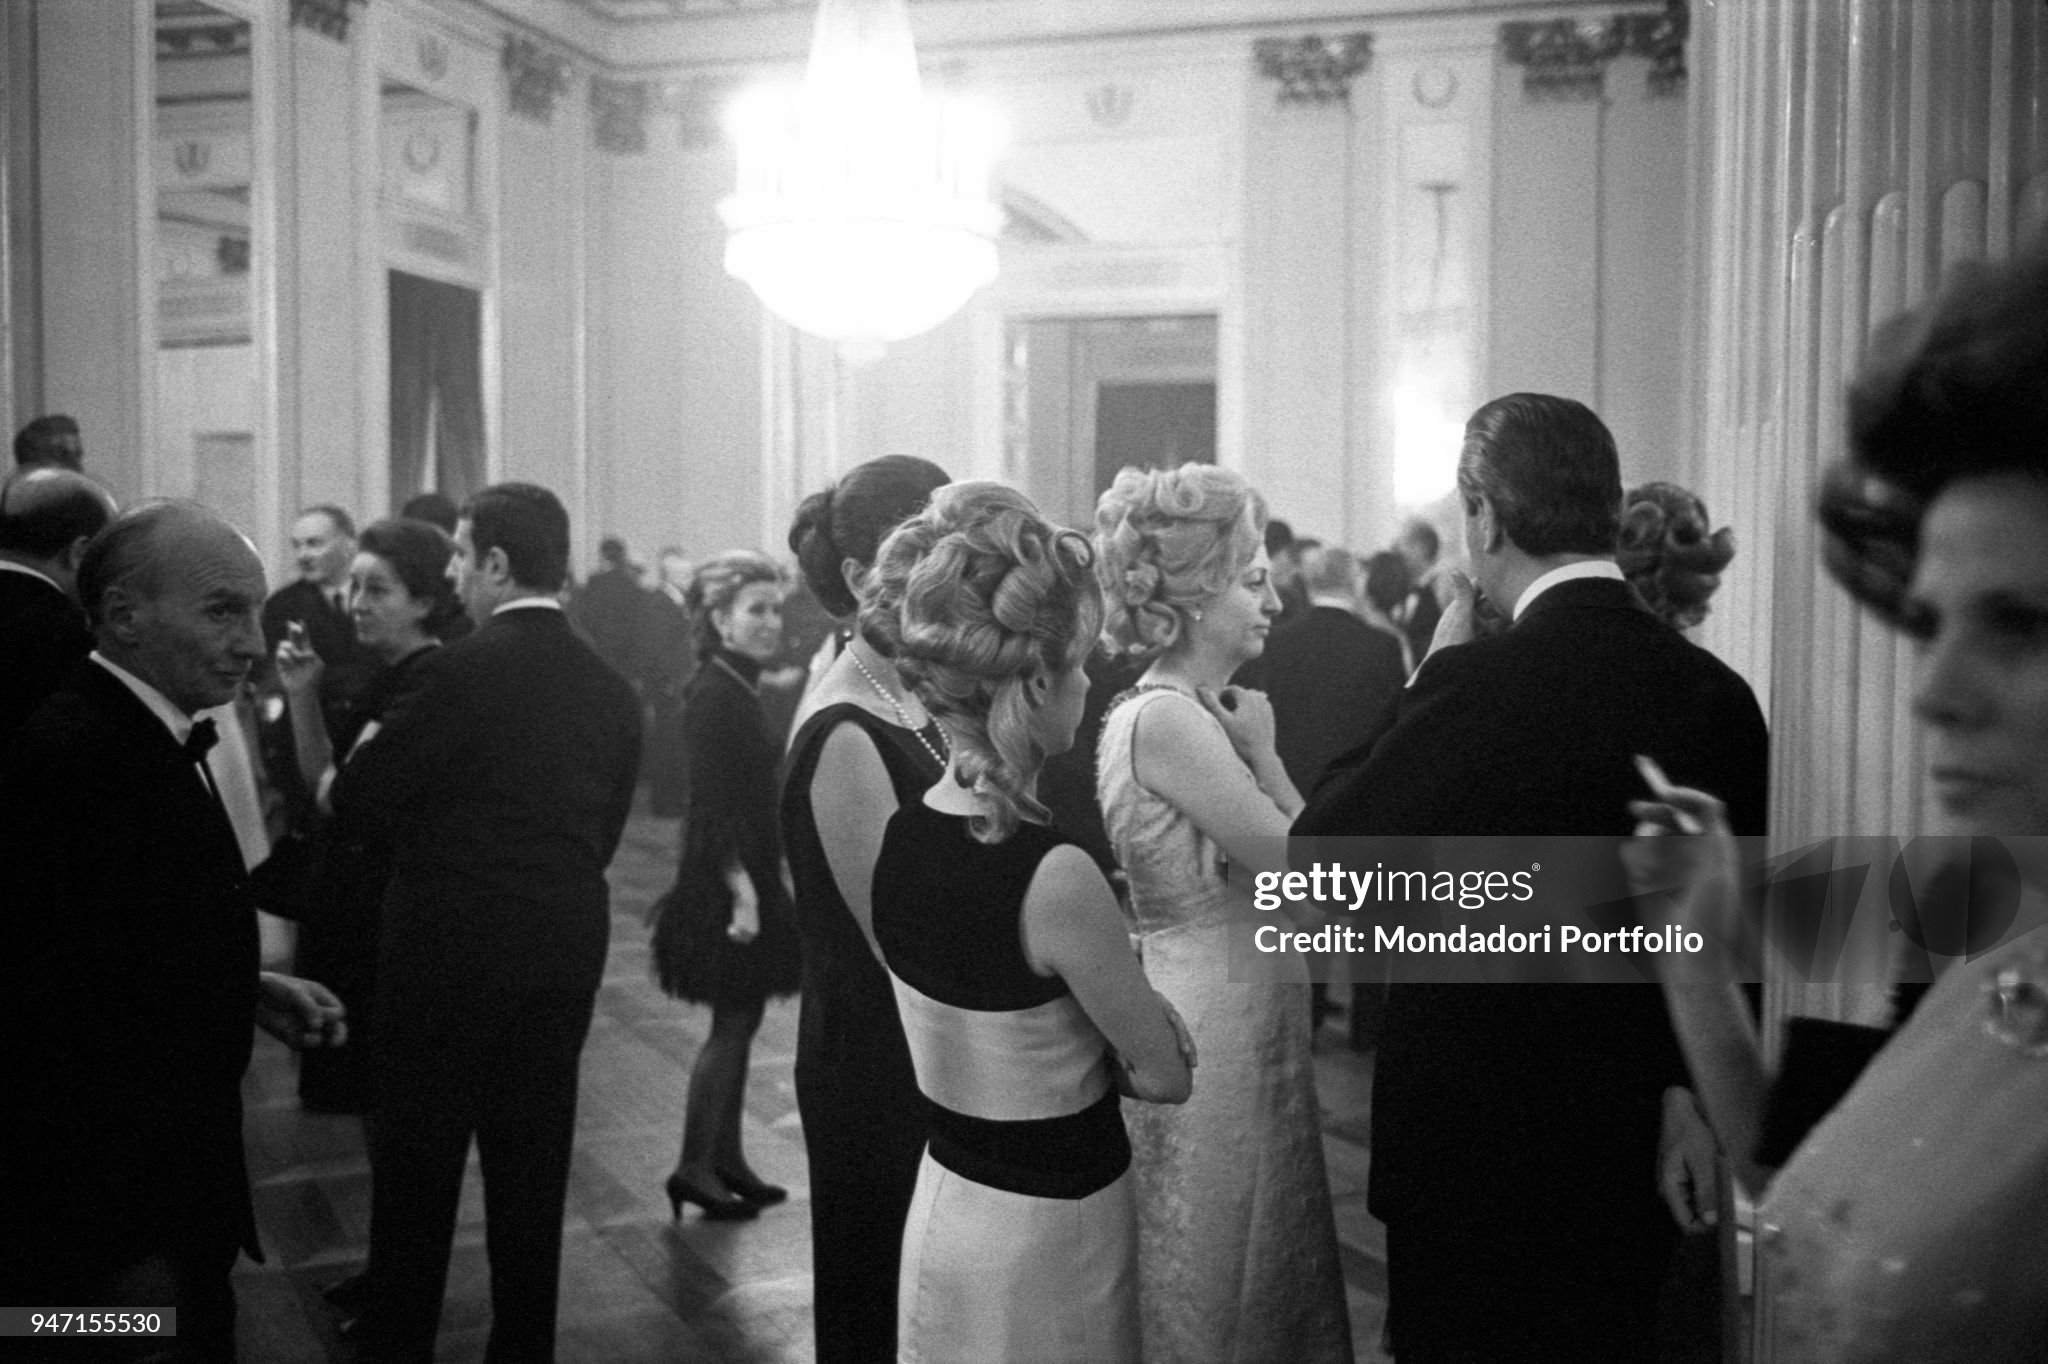 Some spectators waiting for the start of the opening night in the foyer of La Scala in Milan on 07 December 1968, while outside violent protests are occurring. 